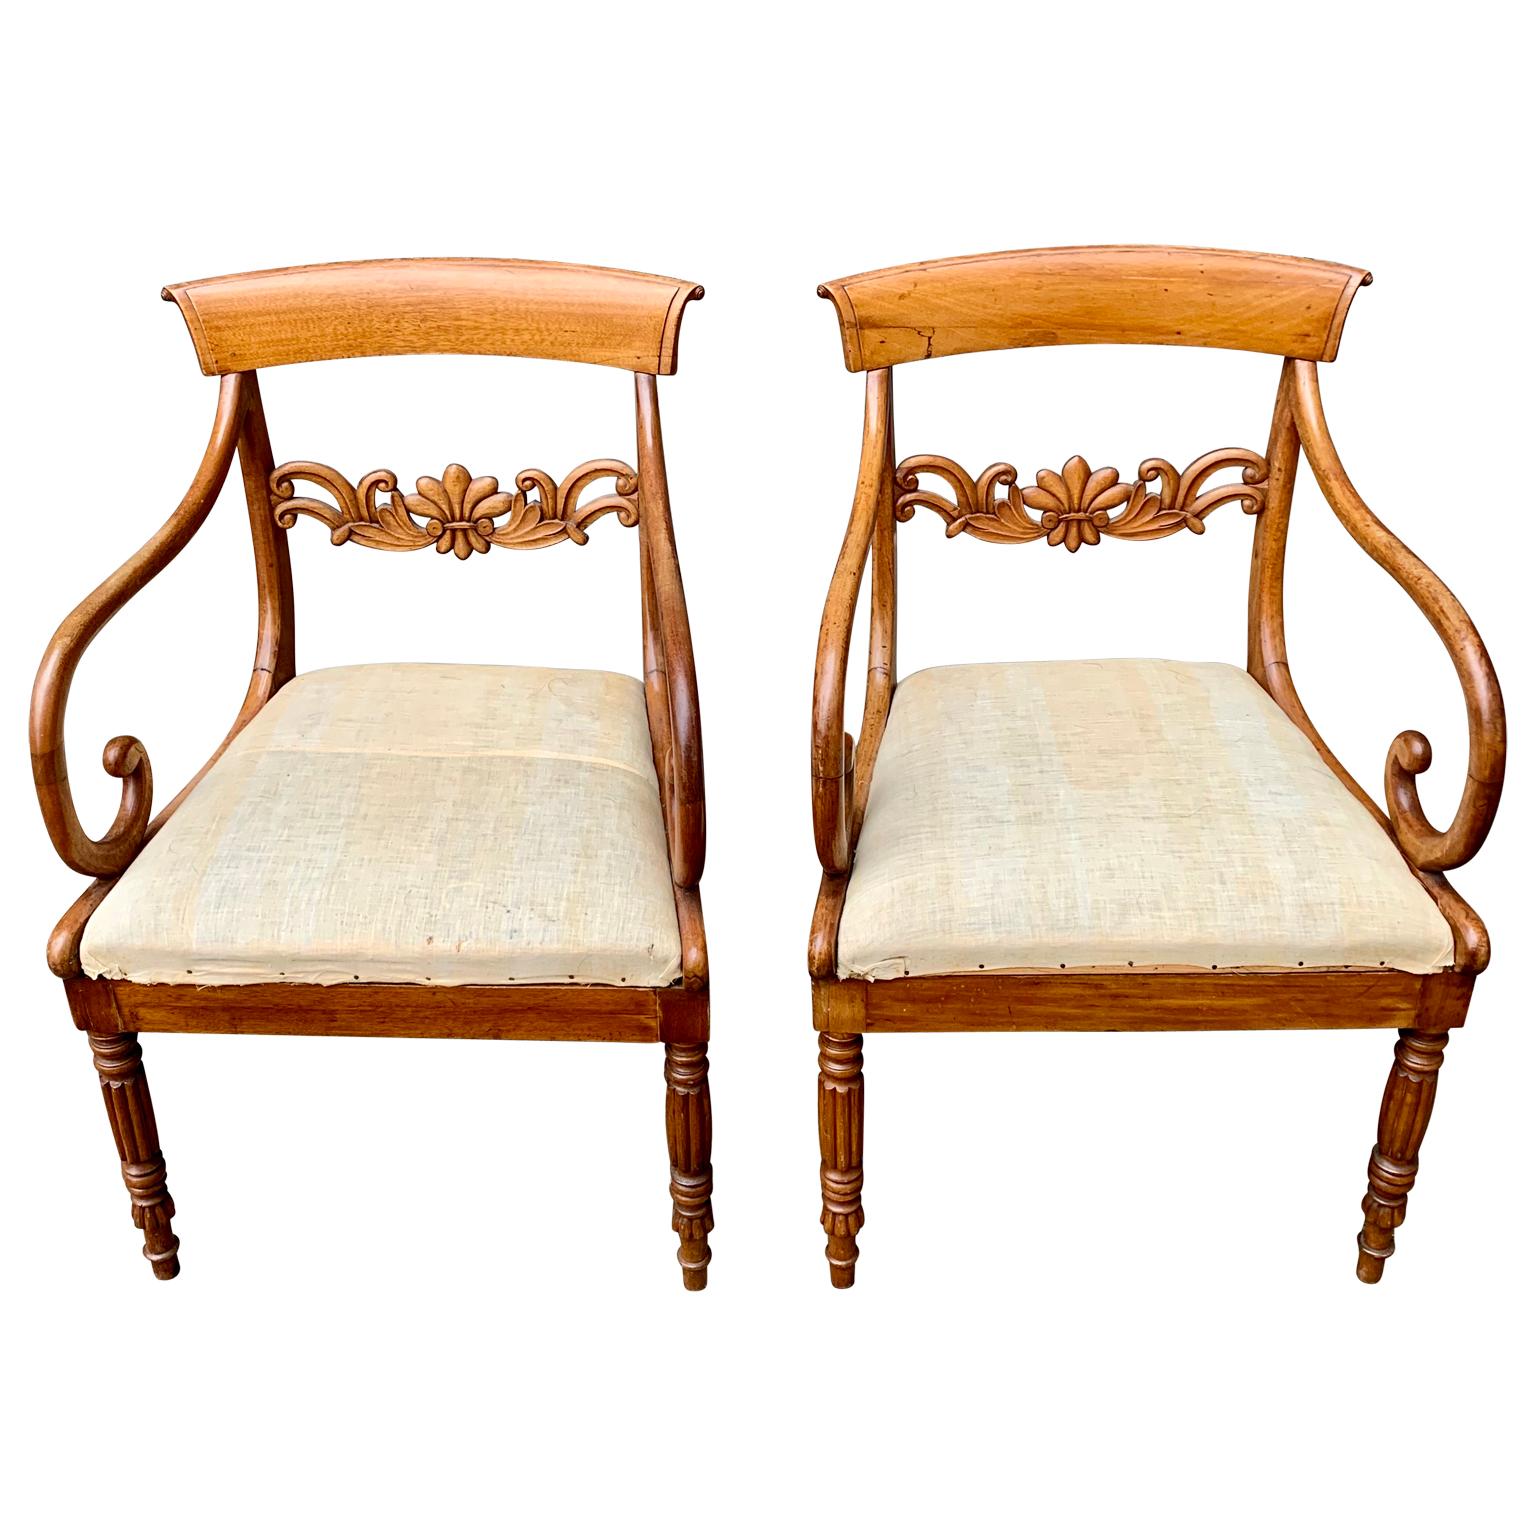 A pair of signed (NTS) Karl Johan Swedish empire dining armchair with scrolled arms. Most probably from the city of Lindome, famous for its ebeniste.

Please note that this chest of drawers is located in Halmstad Sweden.
Complementary delivery to